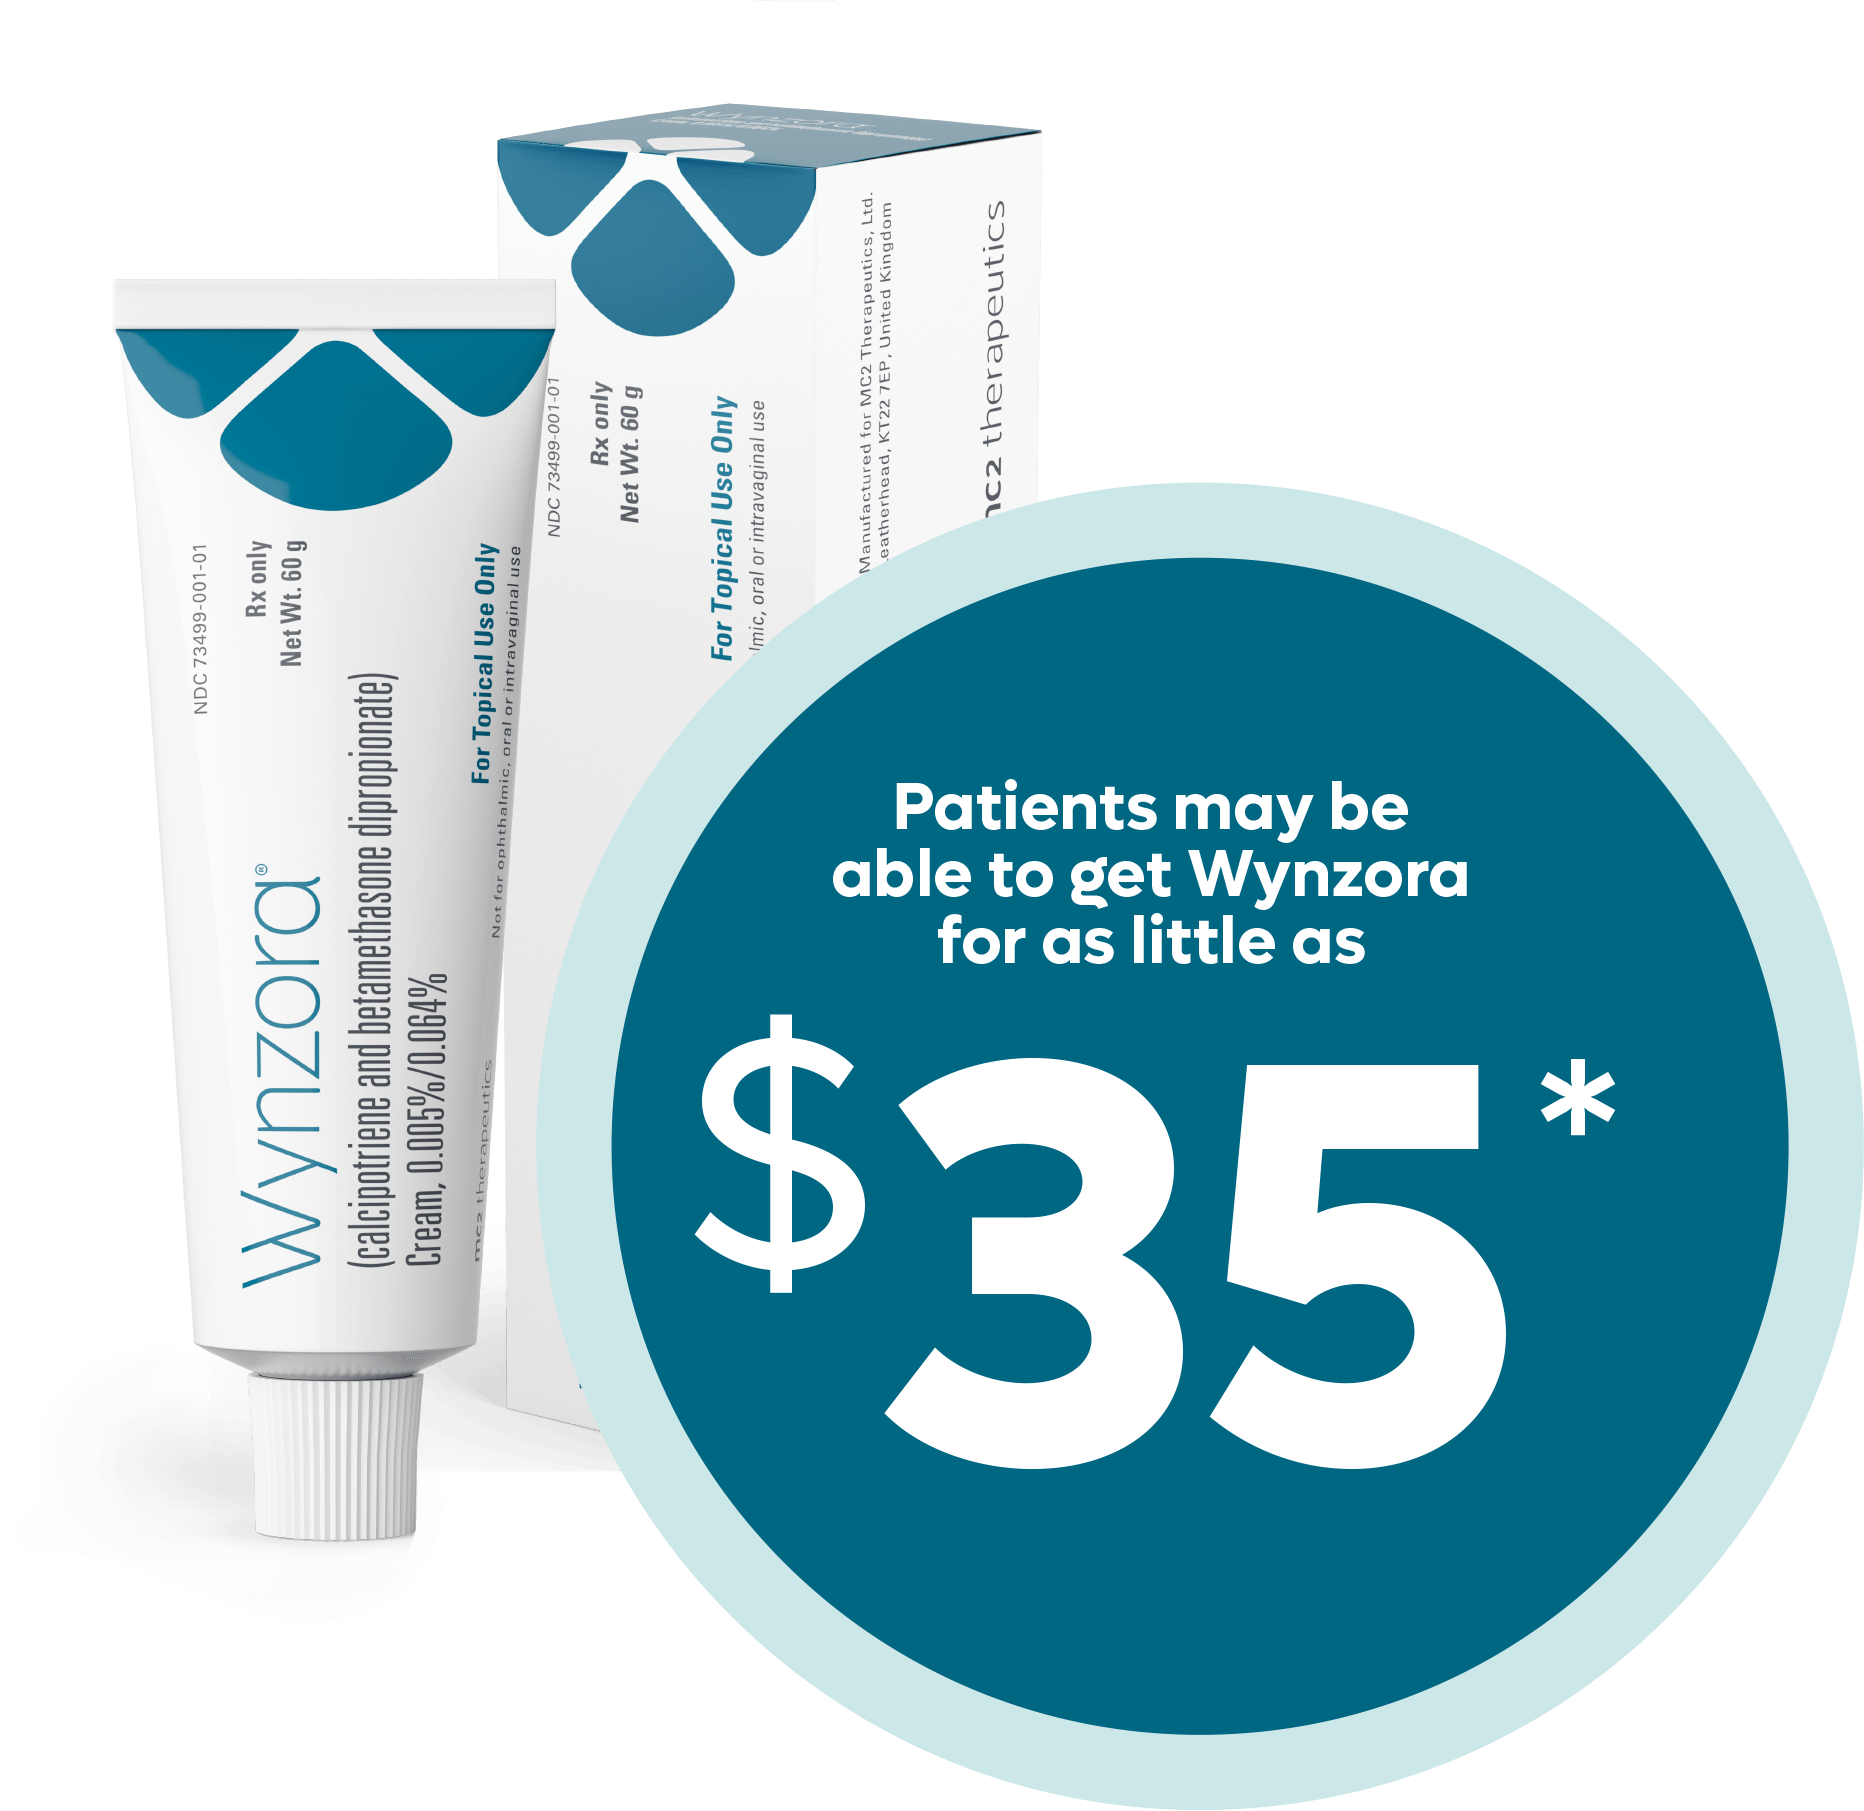 Wynzora Product and Rebate. Patients may be able to get Wynzora for as little as $35*